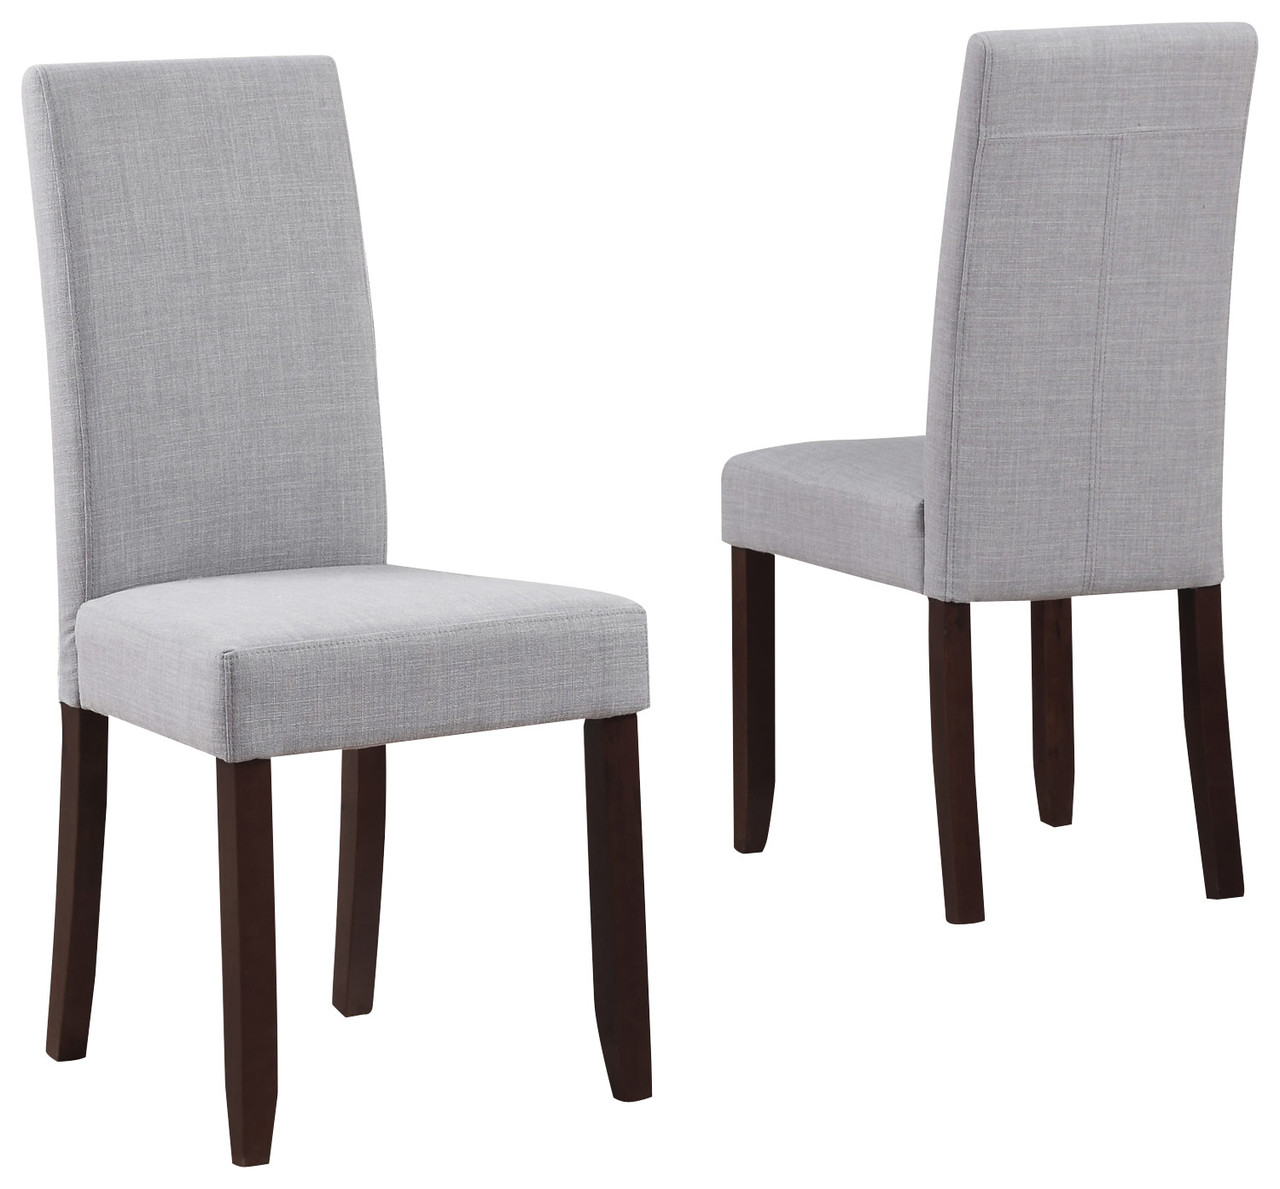 Simpli Home - Acadian Parson Polyester Fabric Dining Chairs (Set of 2) - Dove Gray